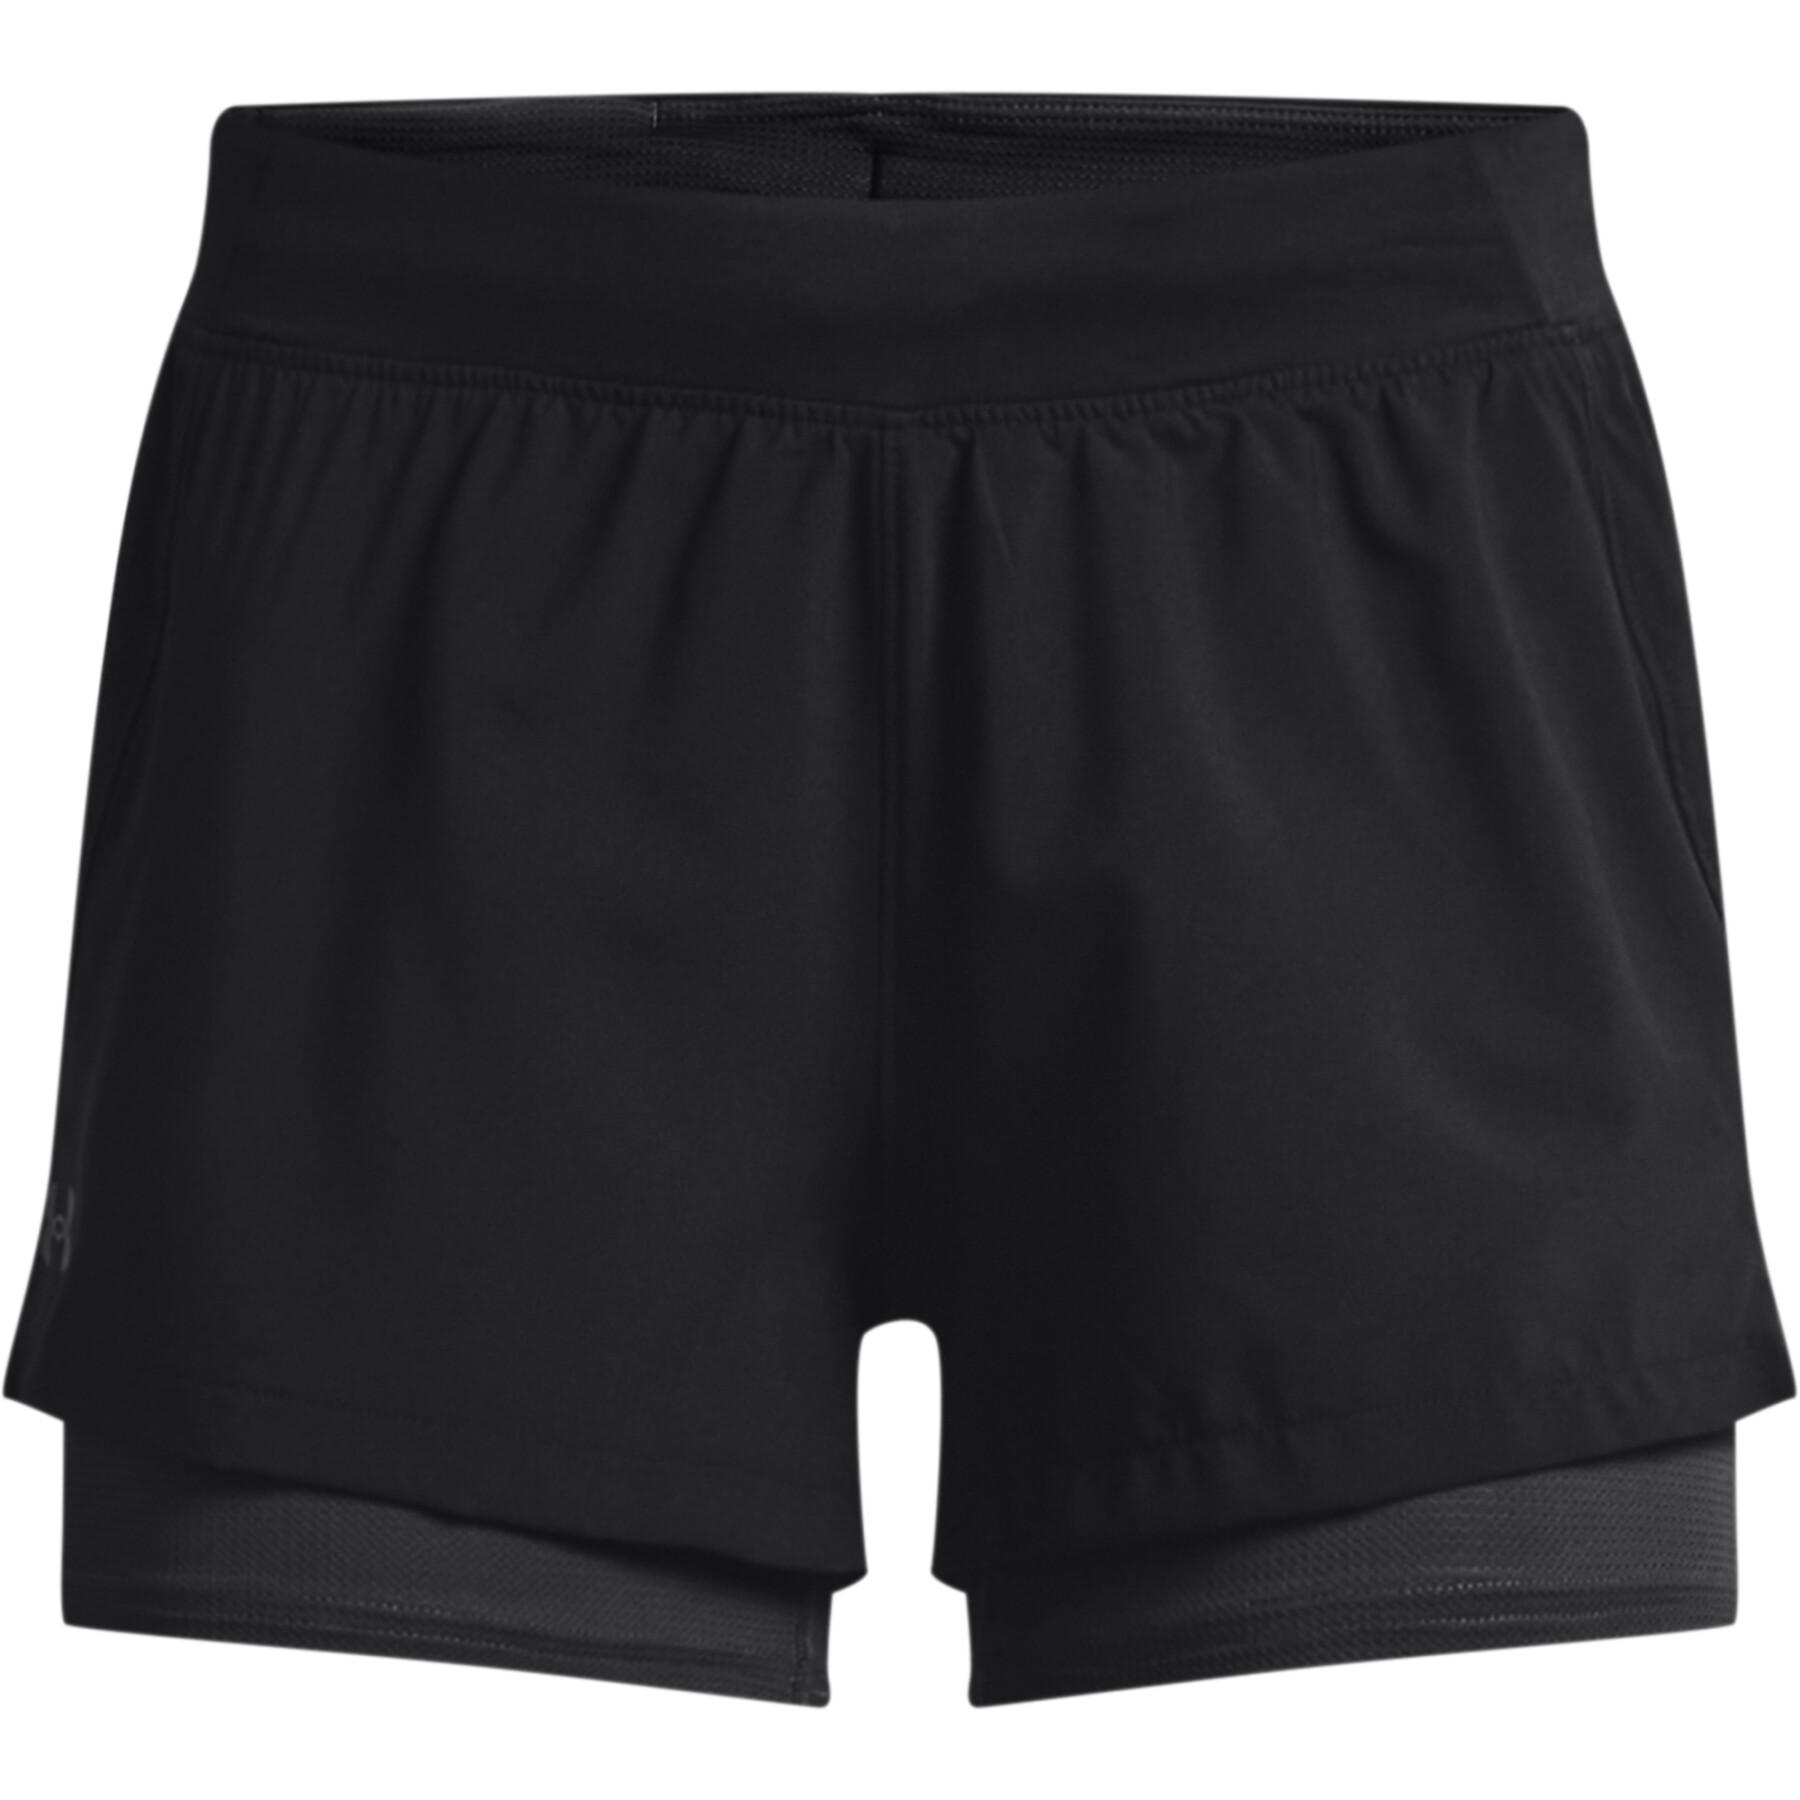 Women's 2-in-1 shorts Under Armour Iso-Chill Run